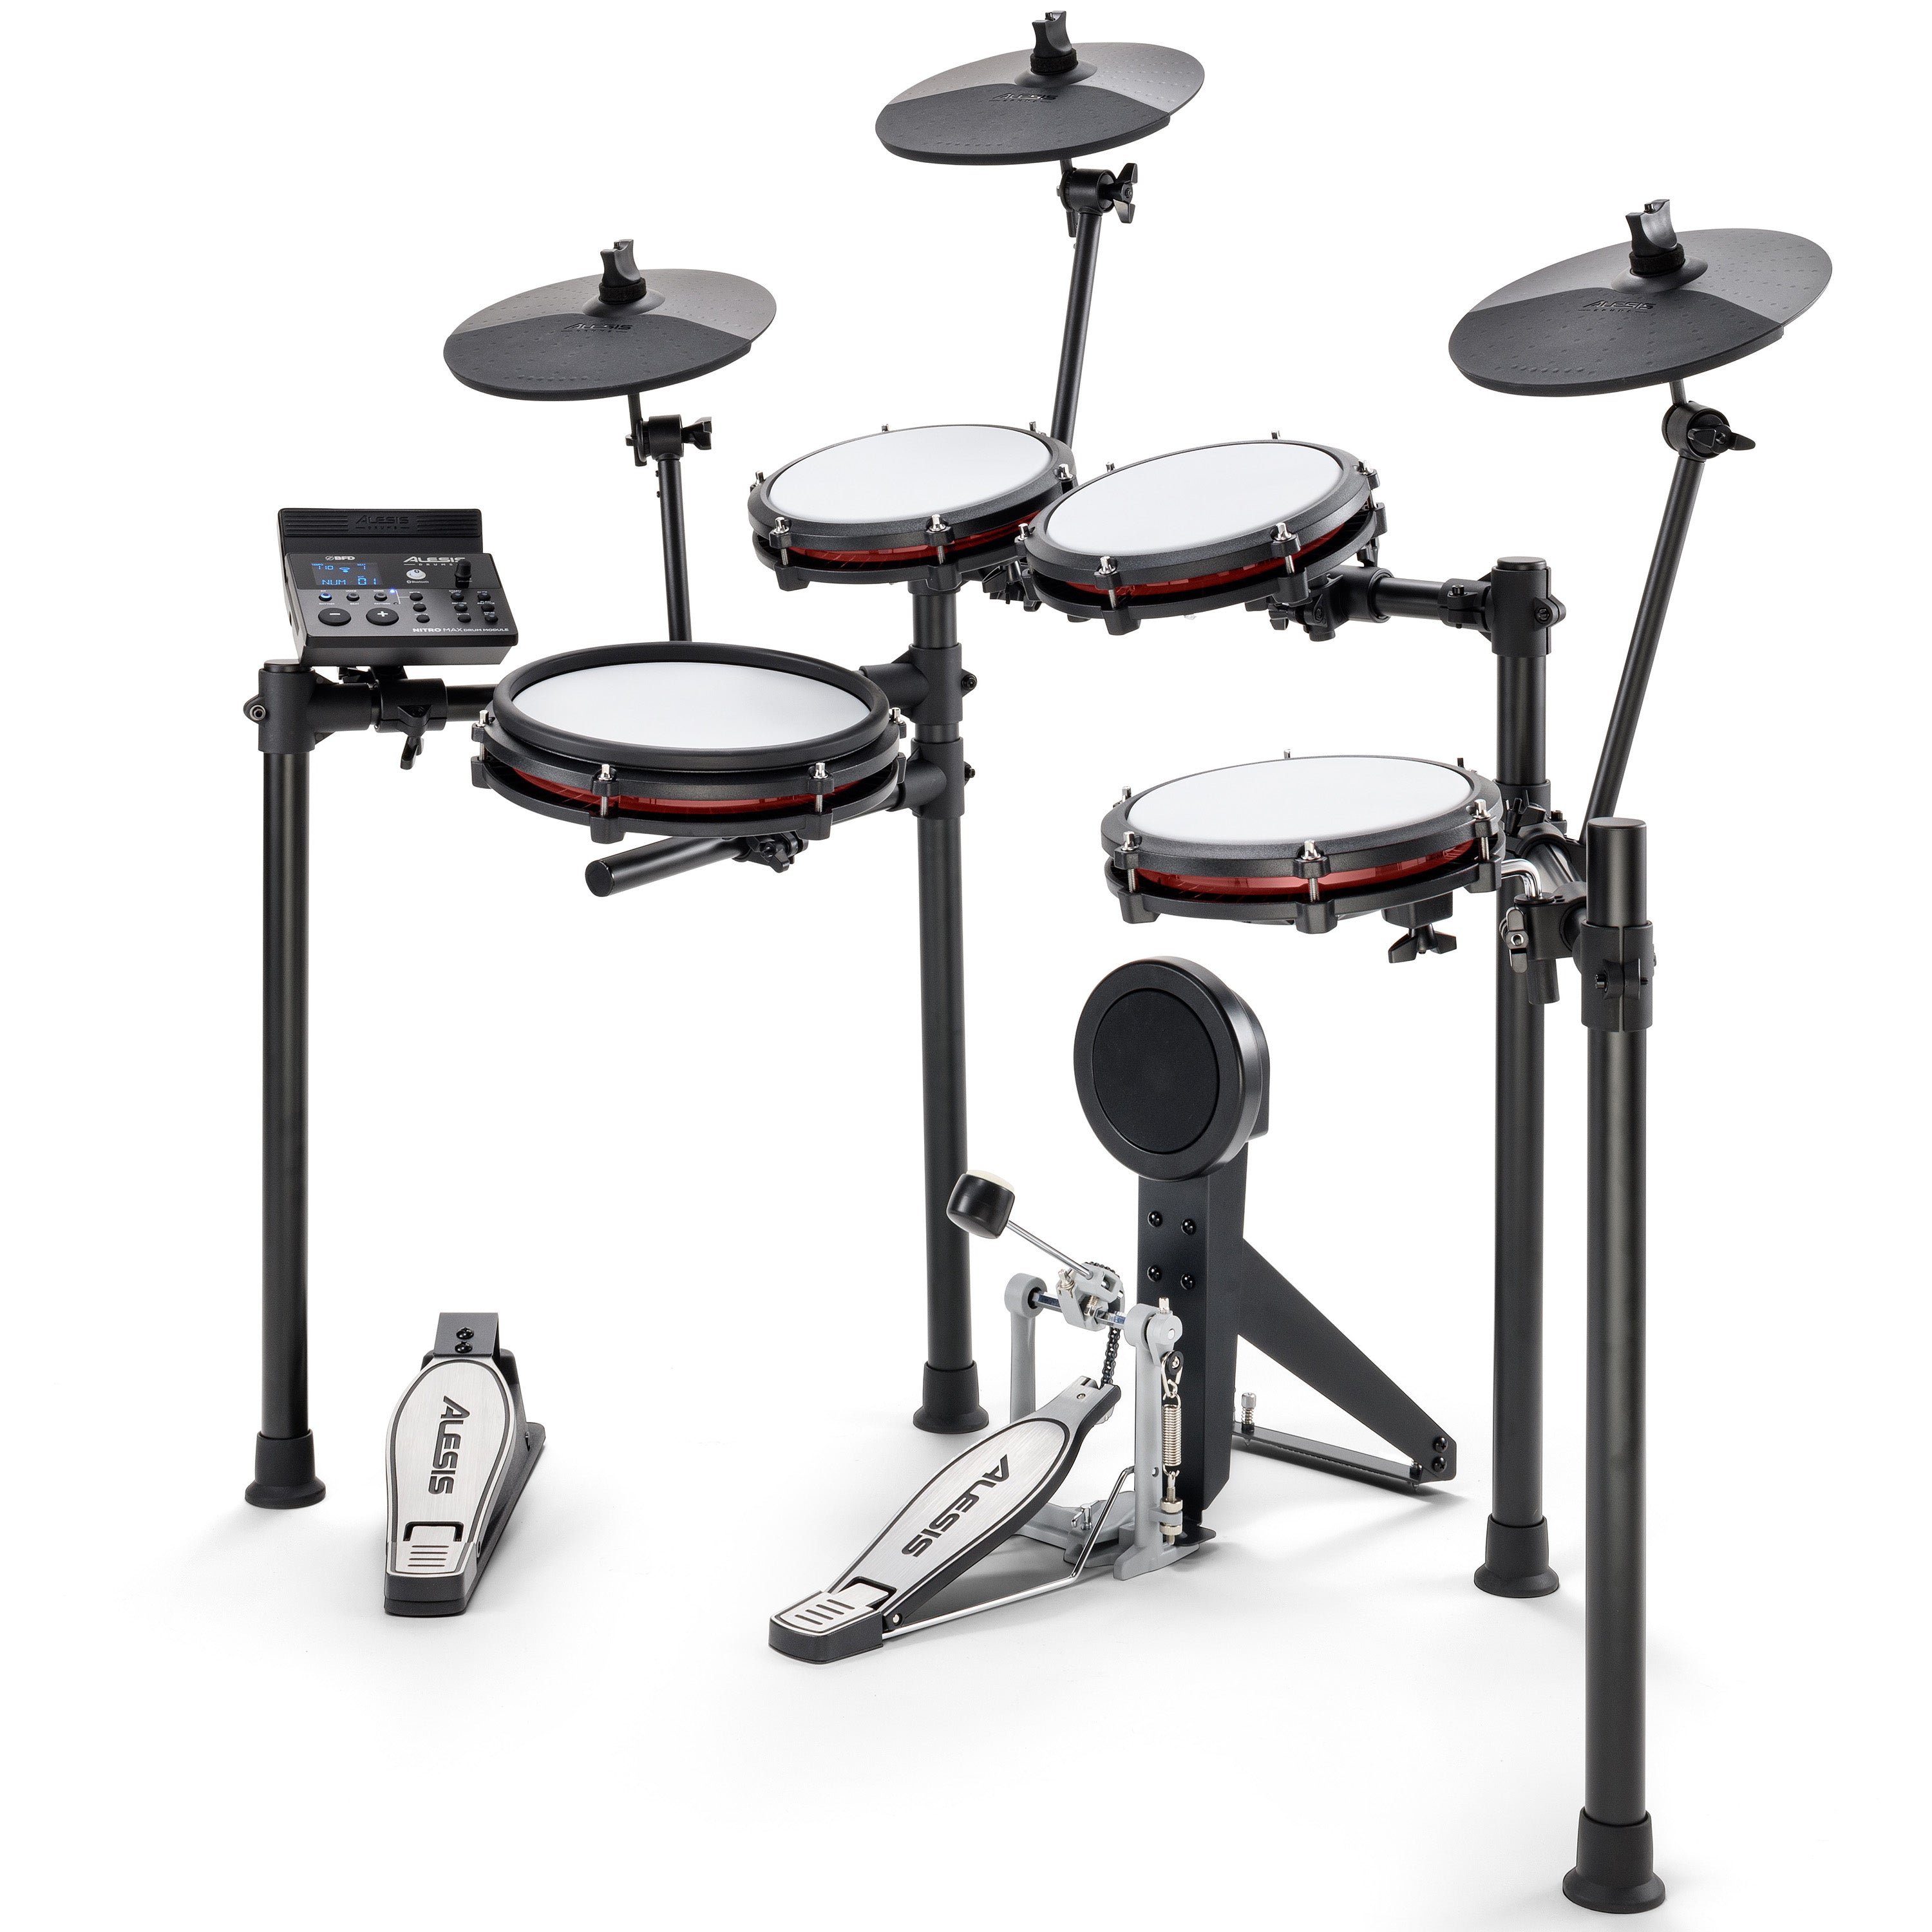 Used Alesis COMPACT KIT 7 Portable Electronic Drum Kit